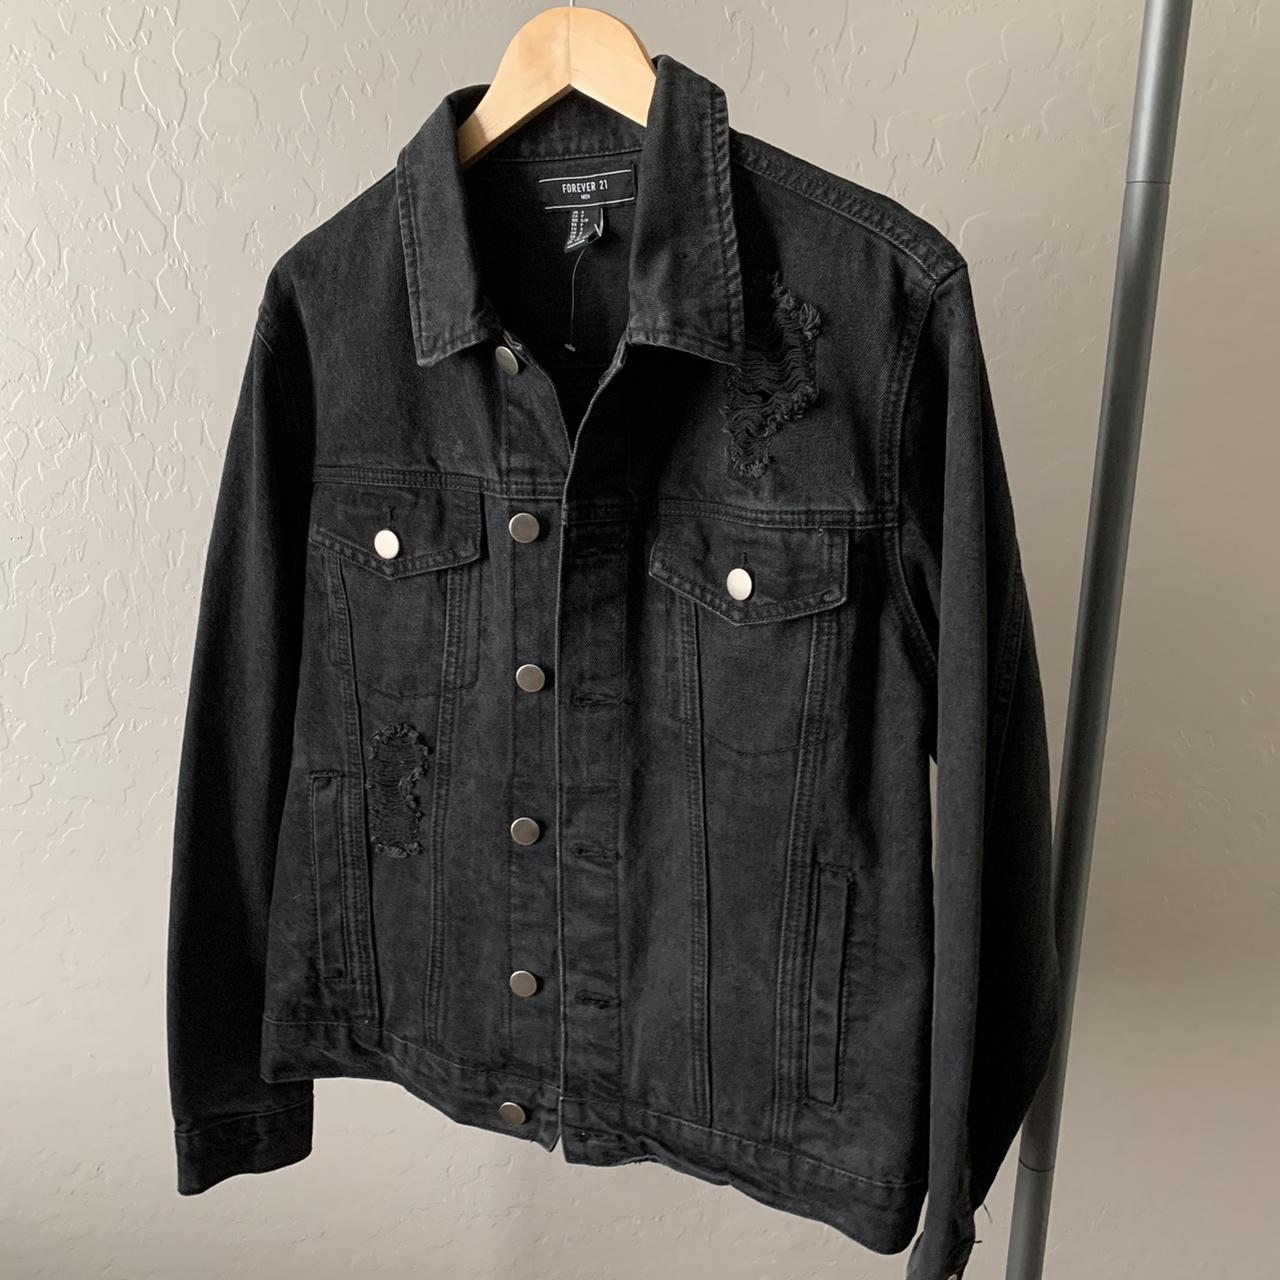 Forever 21 Trucker Jacket! Size Small (can fit... - Depop